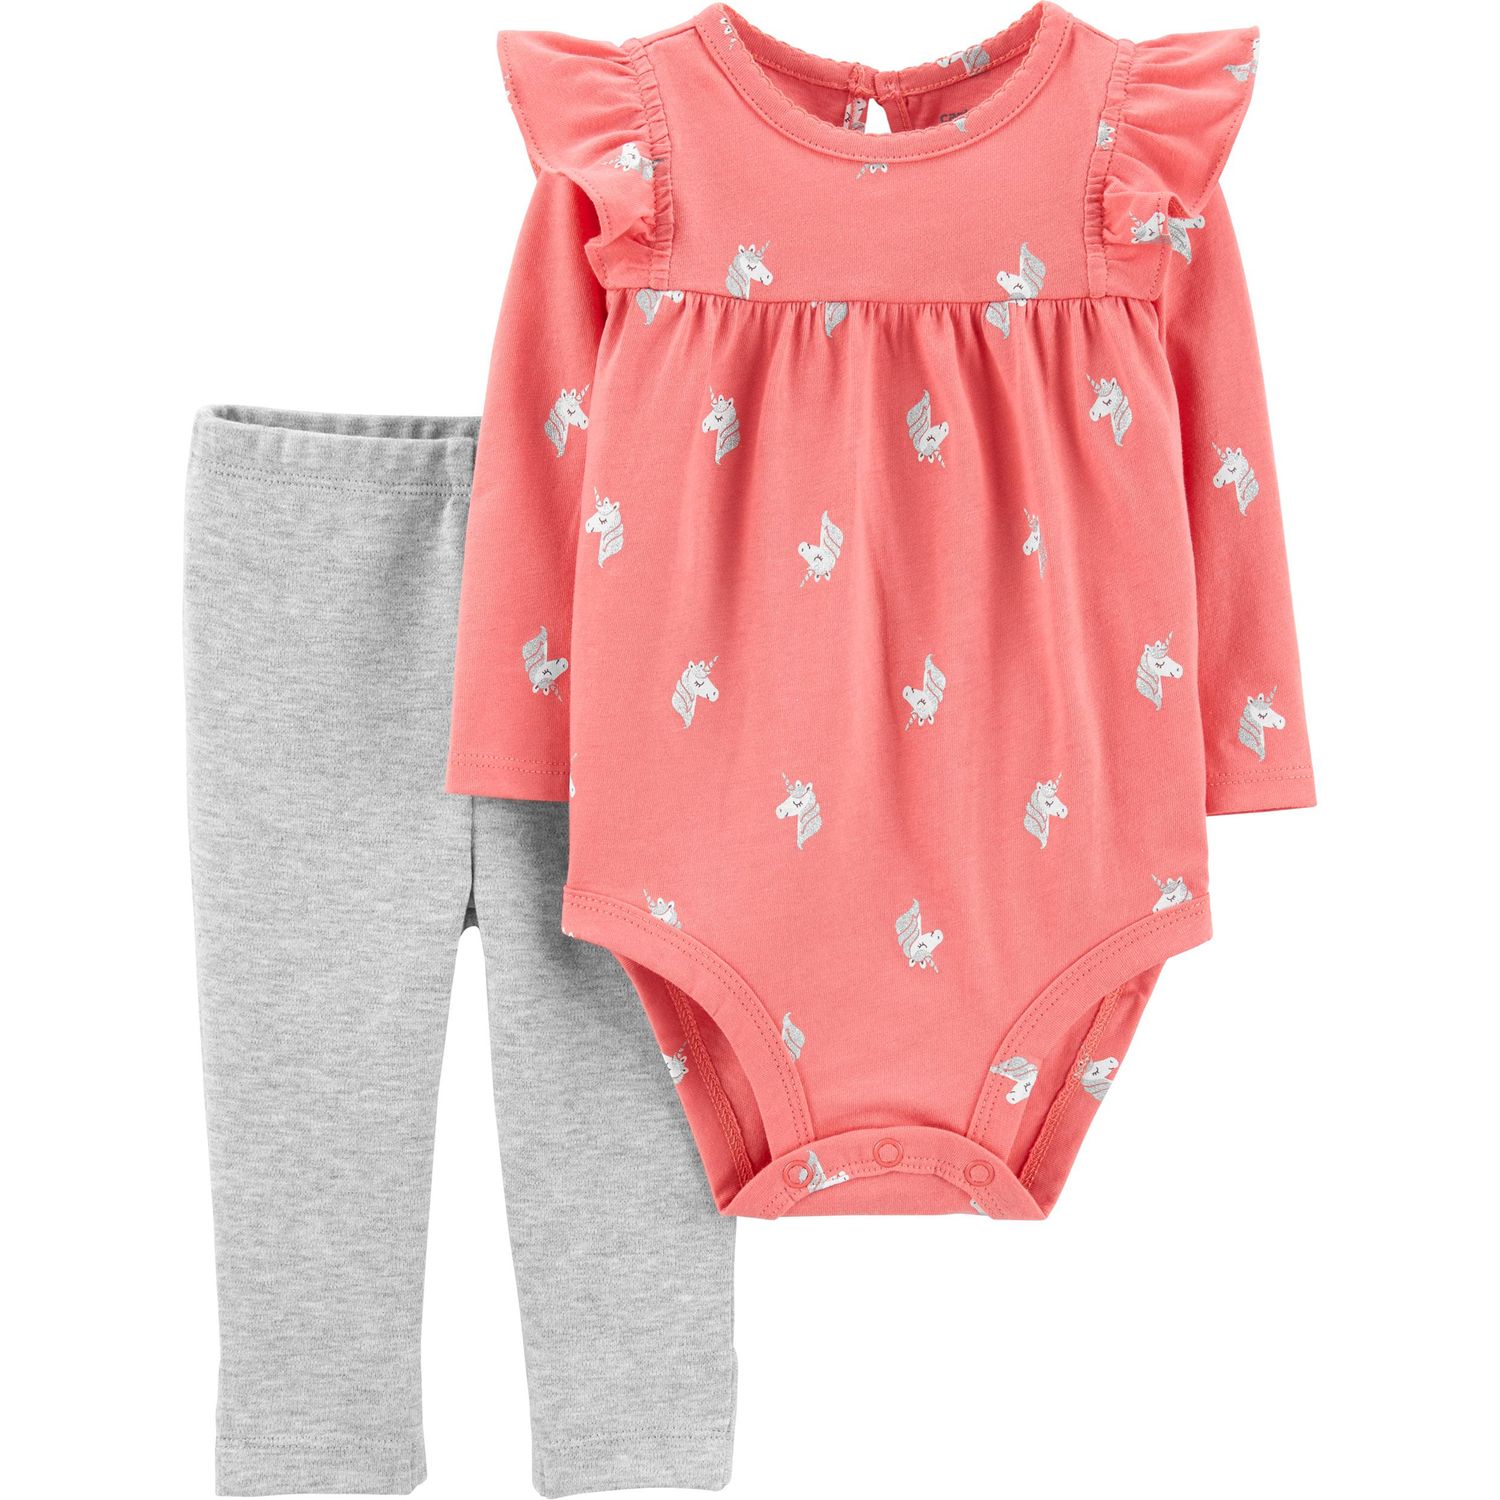 4 month baby clothes online